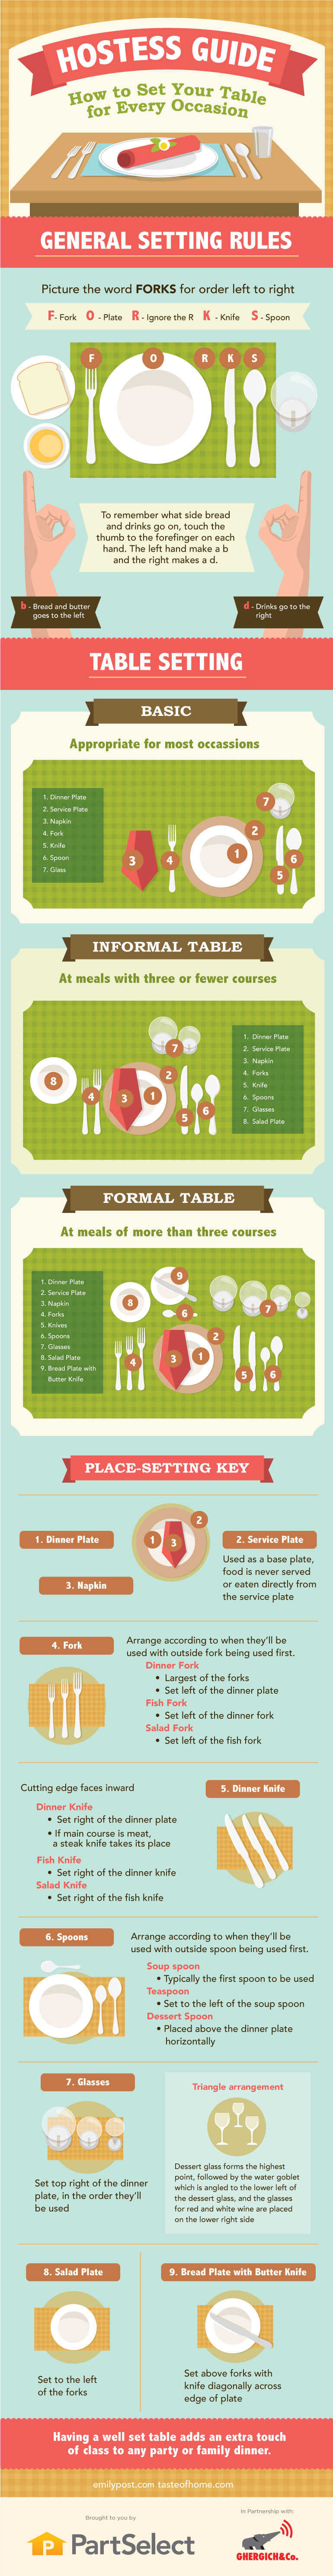 Different Occasions Demand Different Table Settings - Infographic